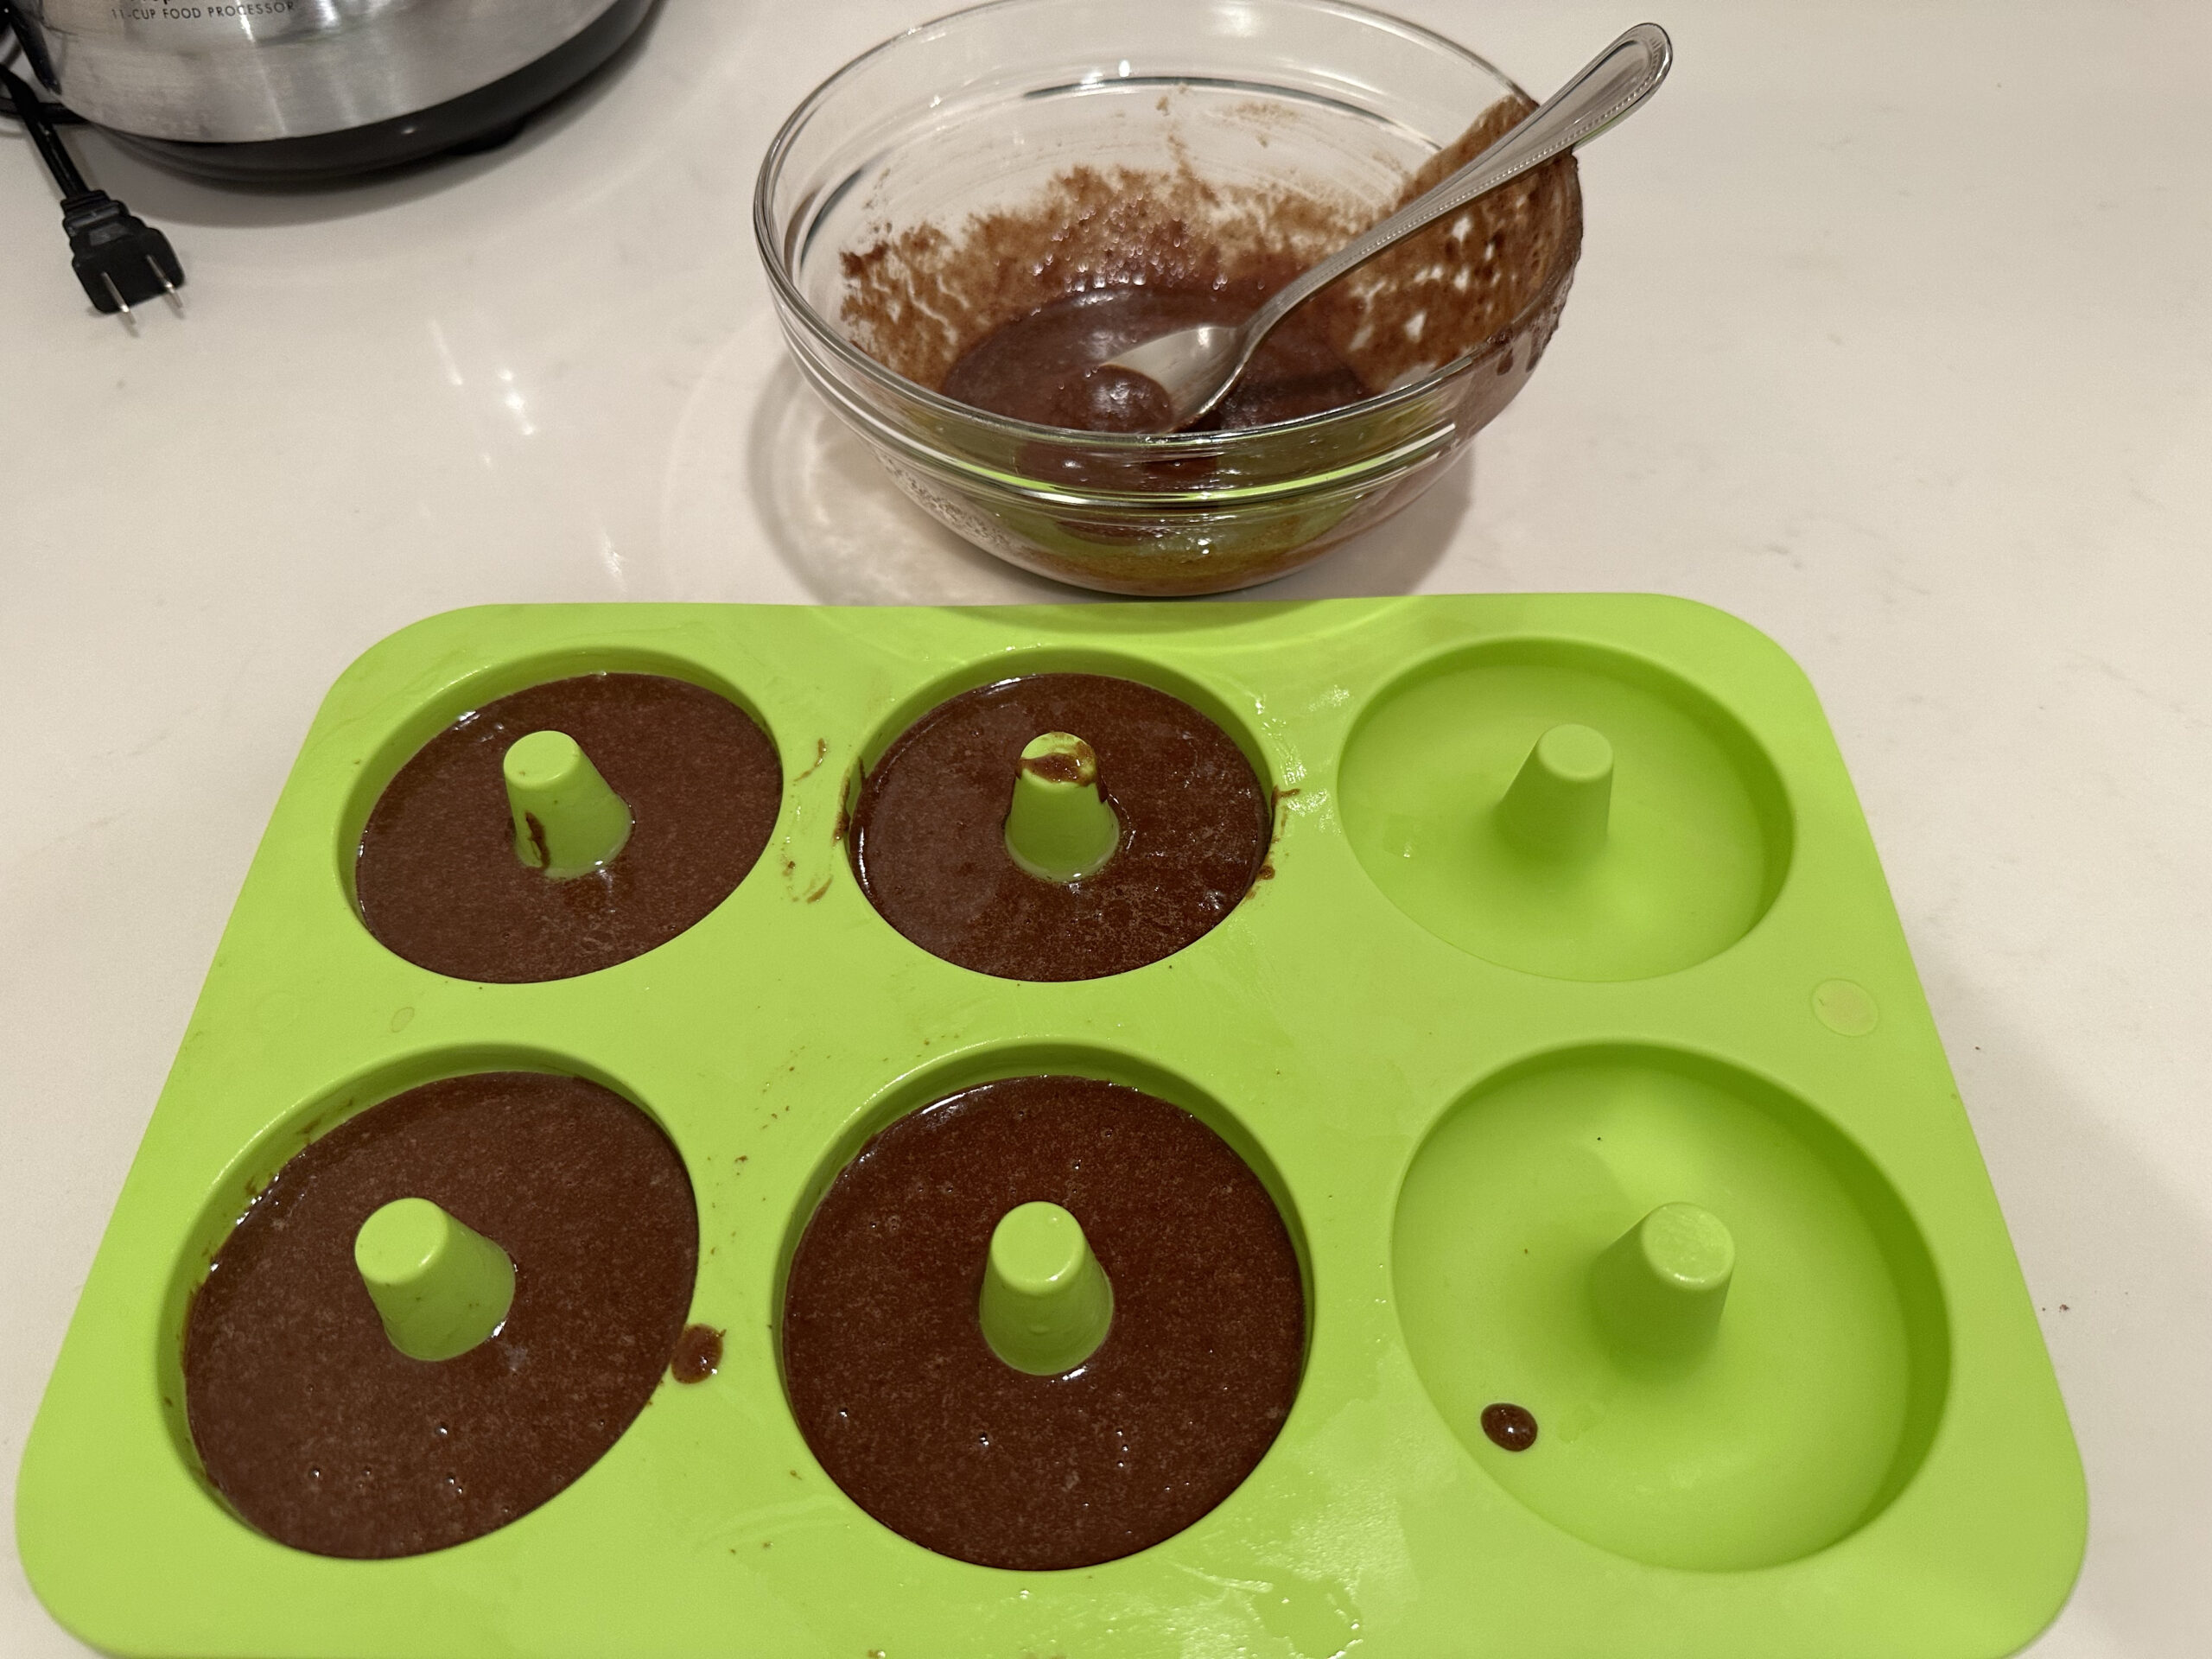 Chocolate donuts batter in mold